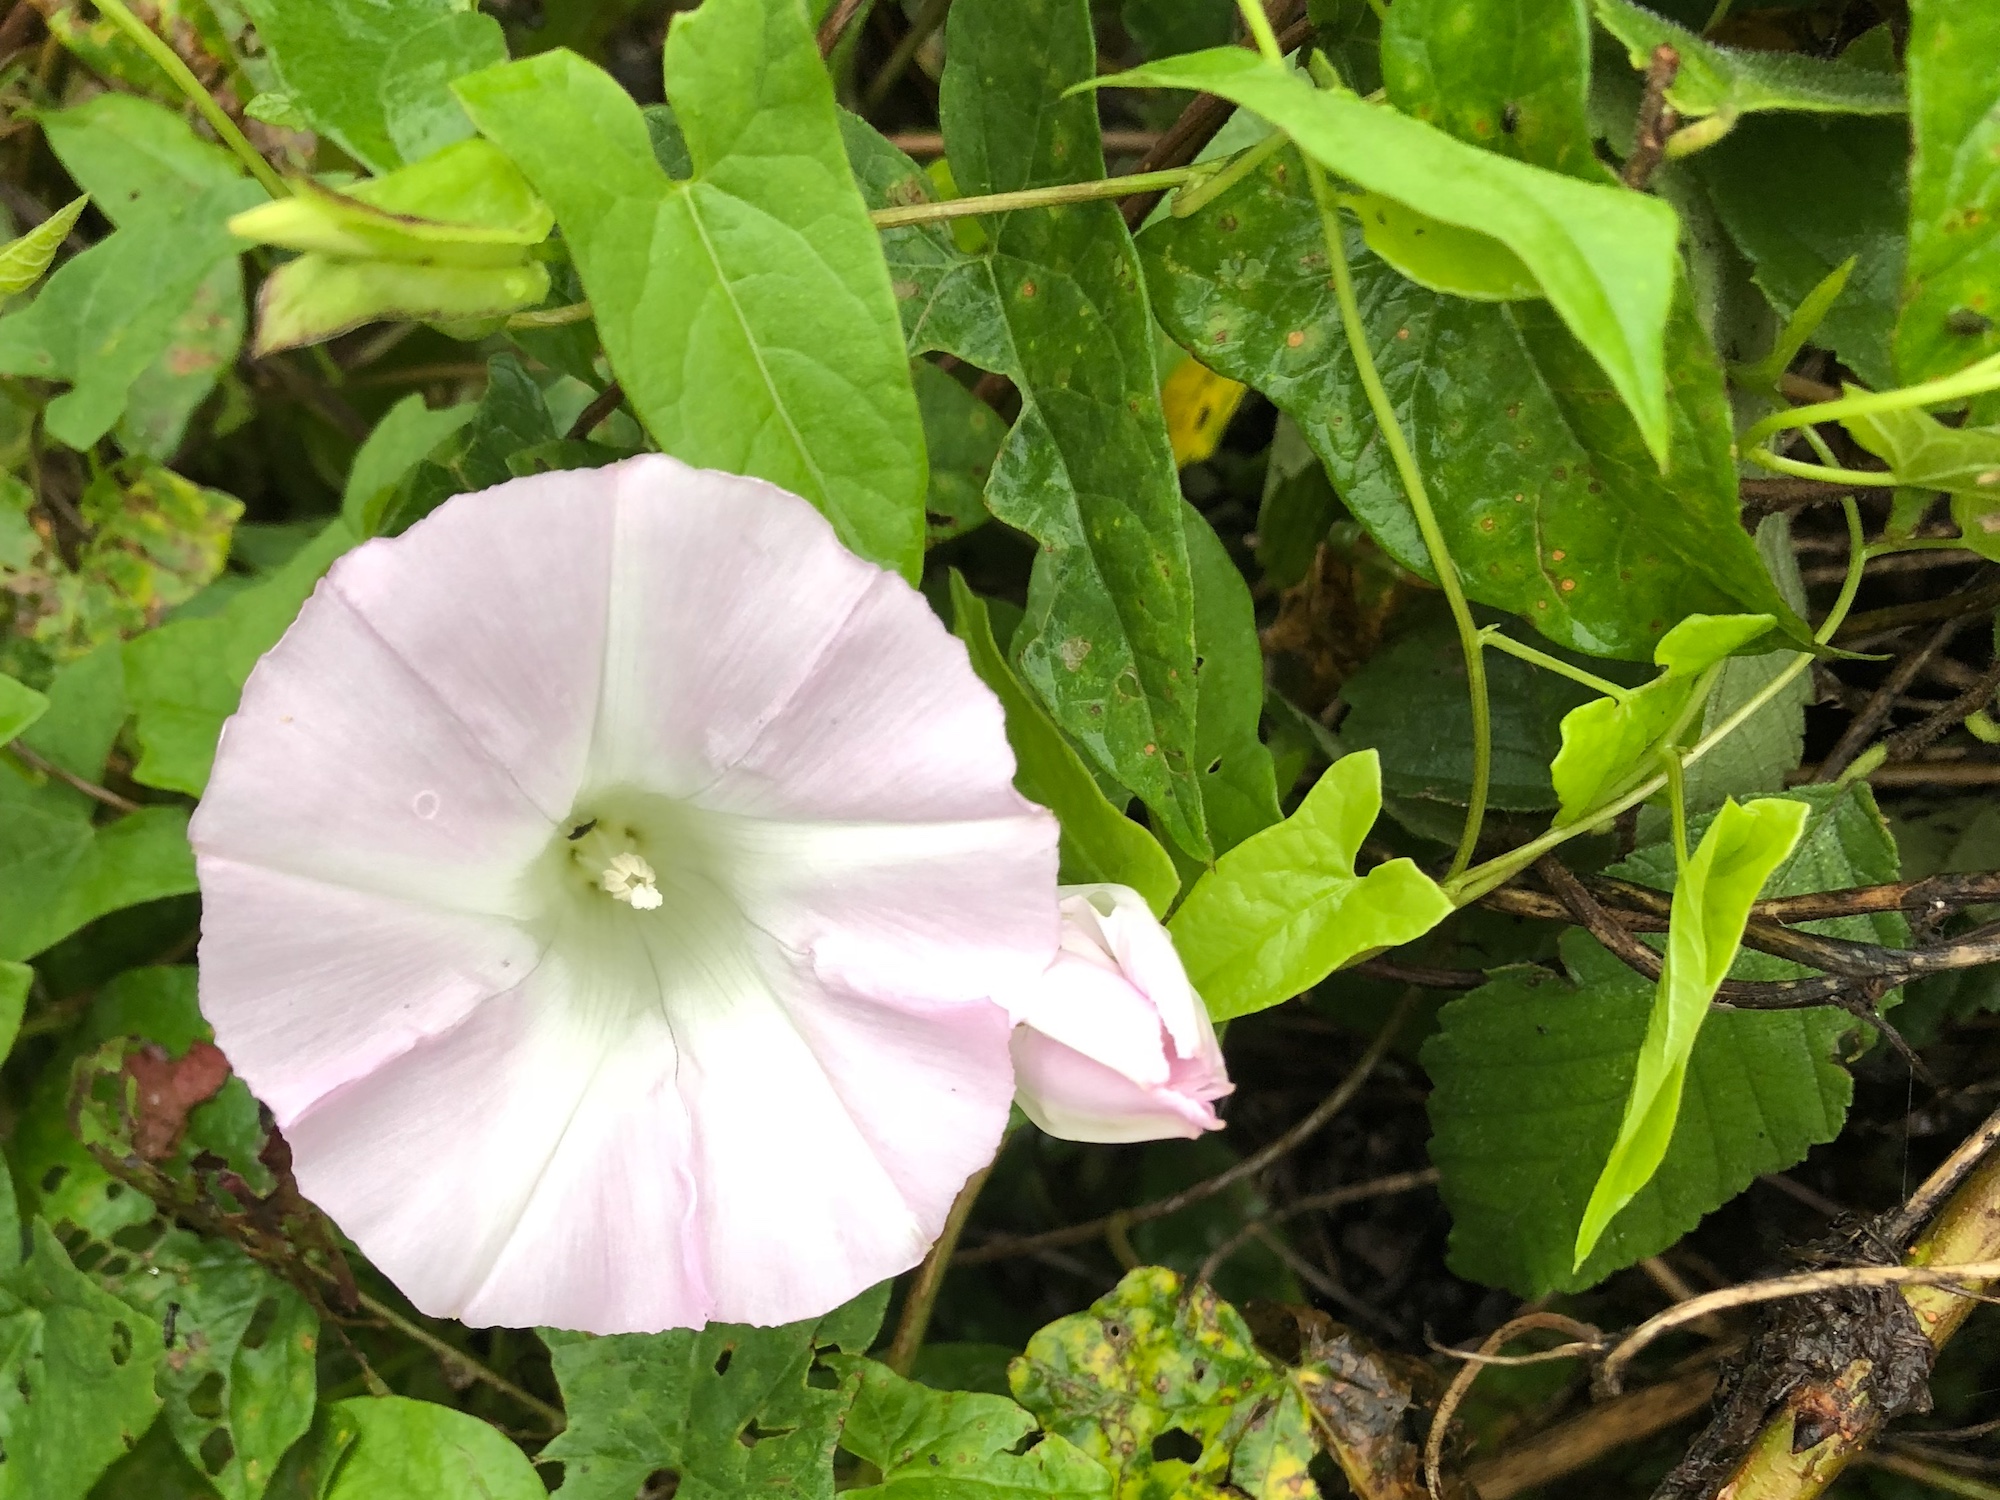 Hedge Bindweed on shore of Marion Dunn Pond in Madison, Wisconsin on September 3, 2018.